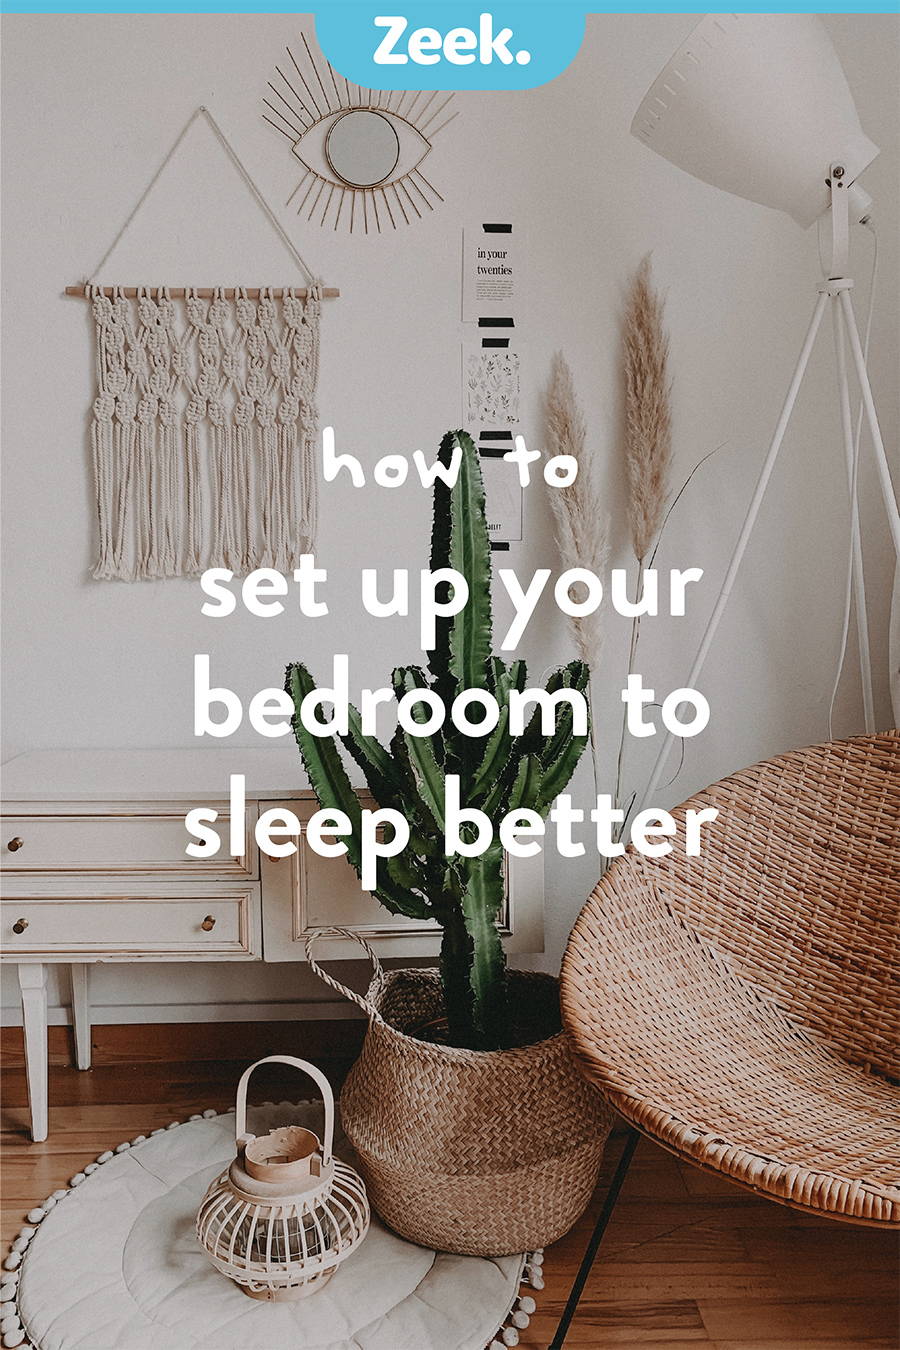 How to set up your bedroom to sleep better